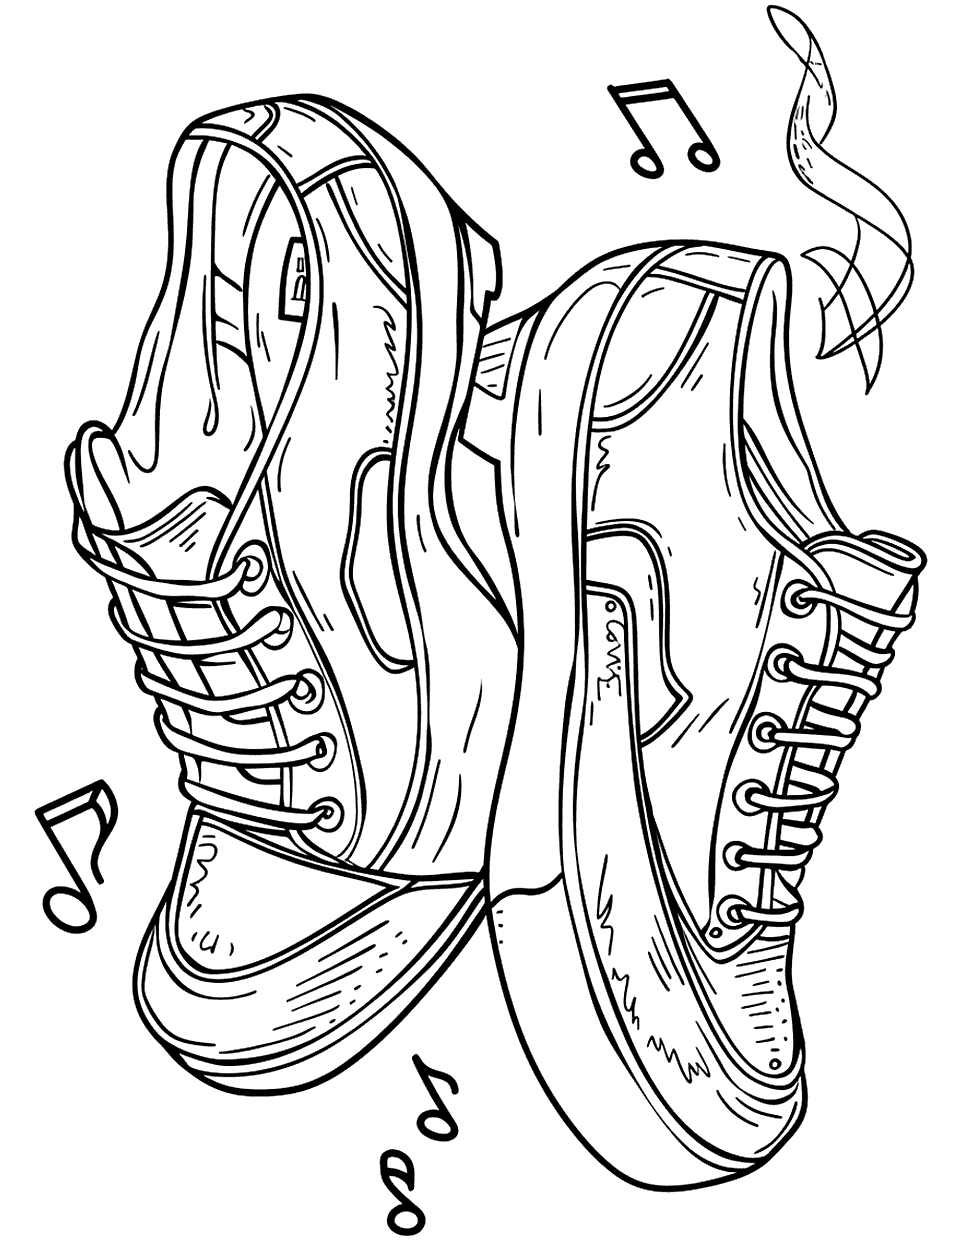 Jazz Shoes at a Concert Shoe Coloring Page - Sleek jazz shoes with music notes floating in the air.